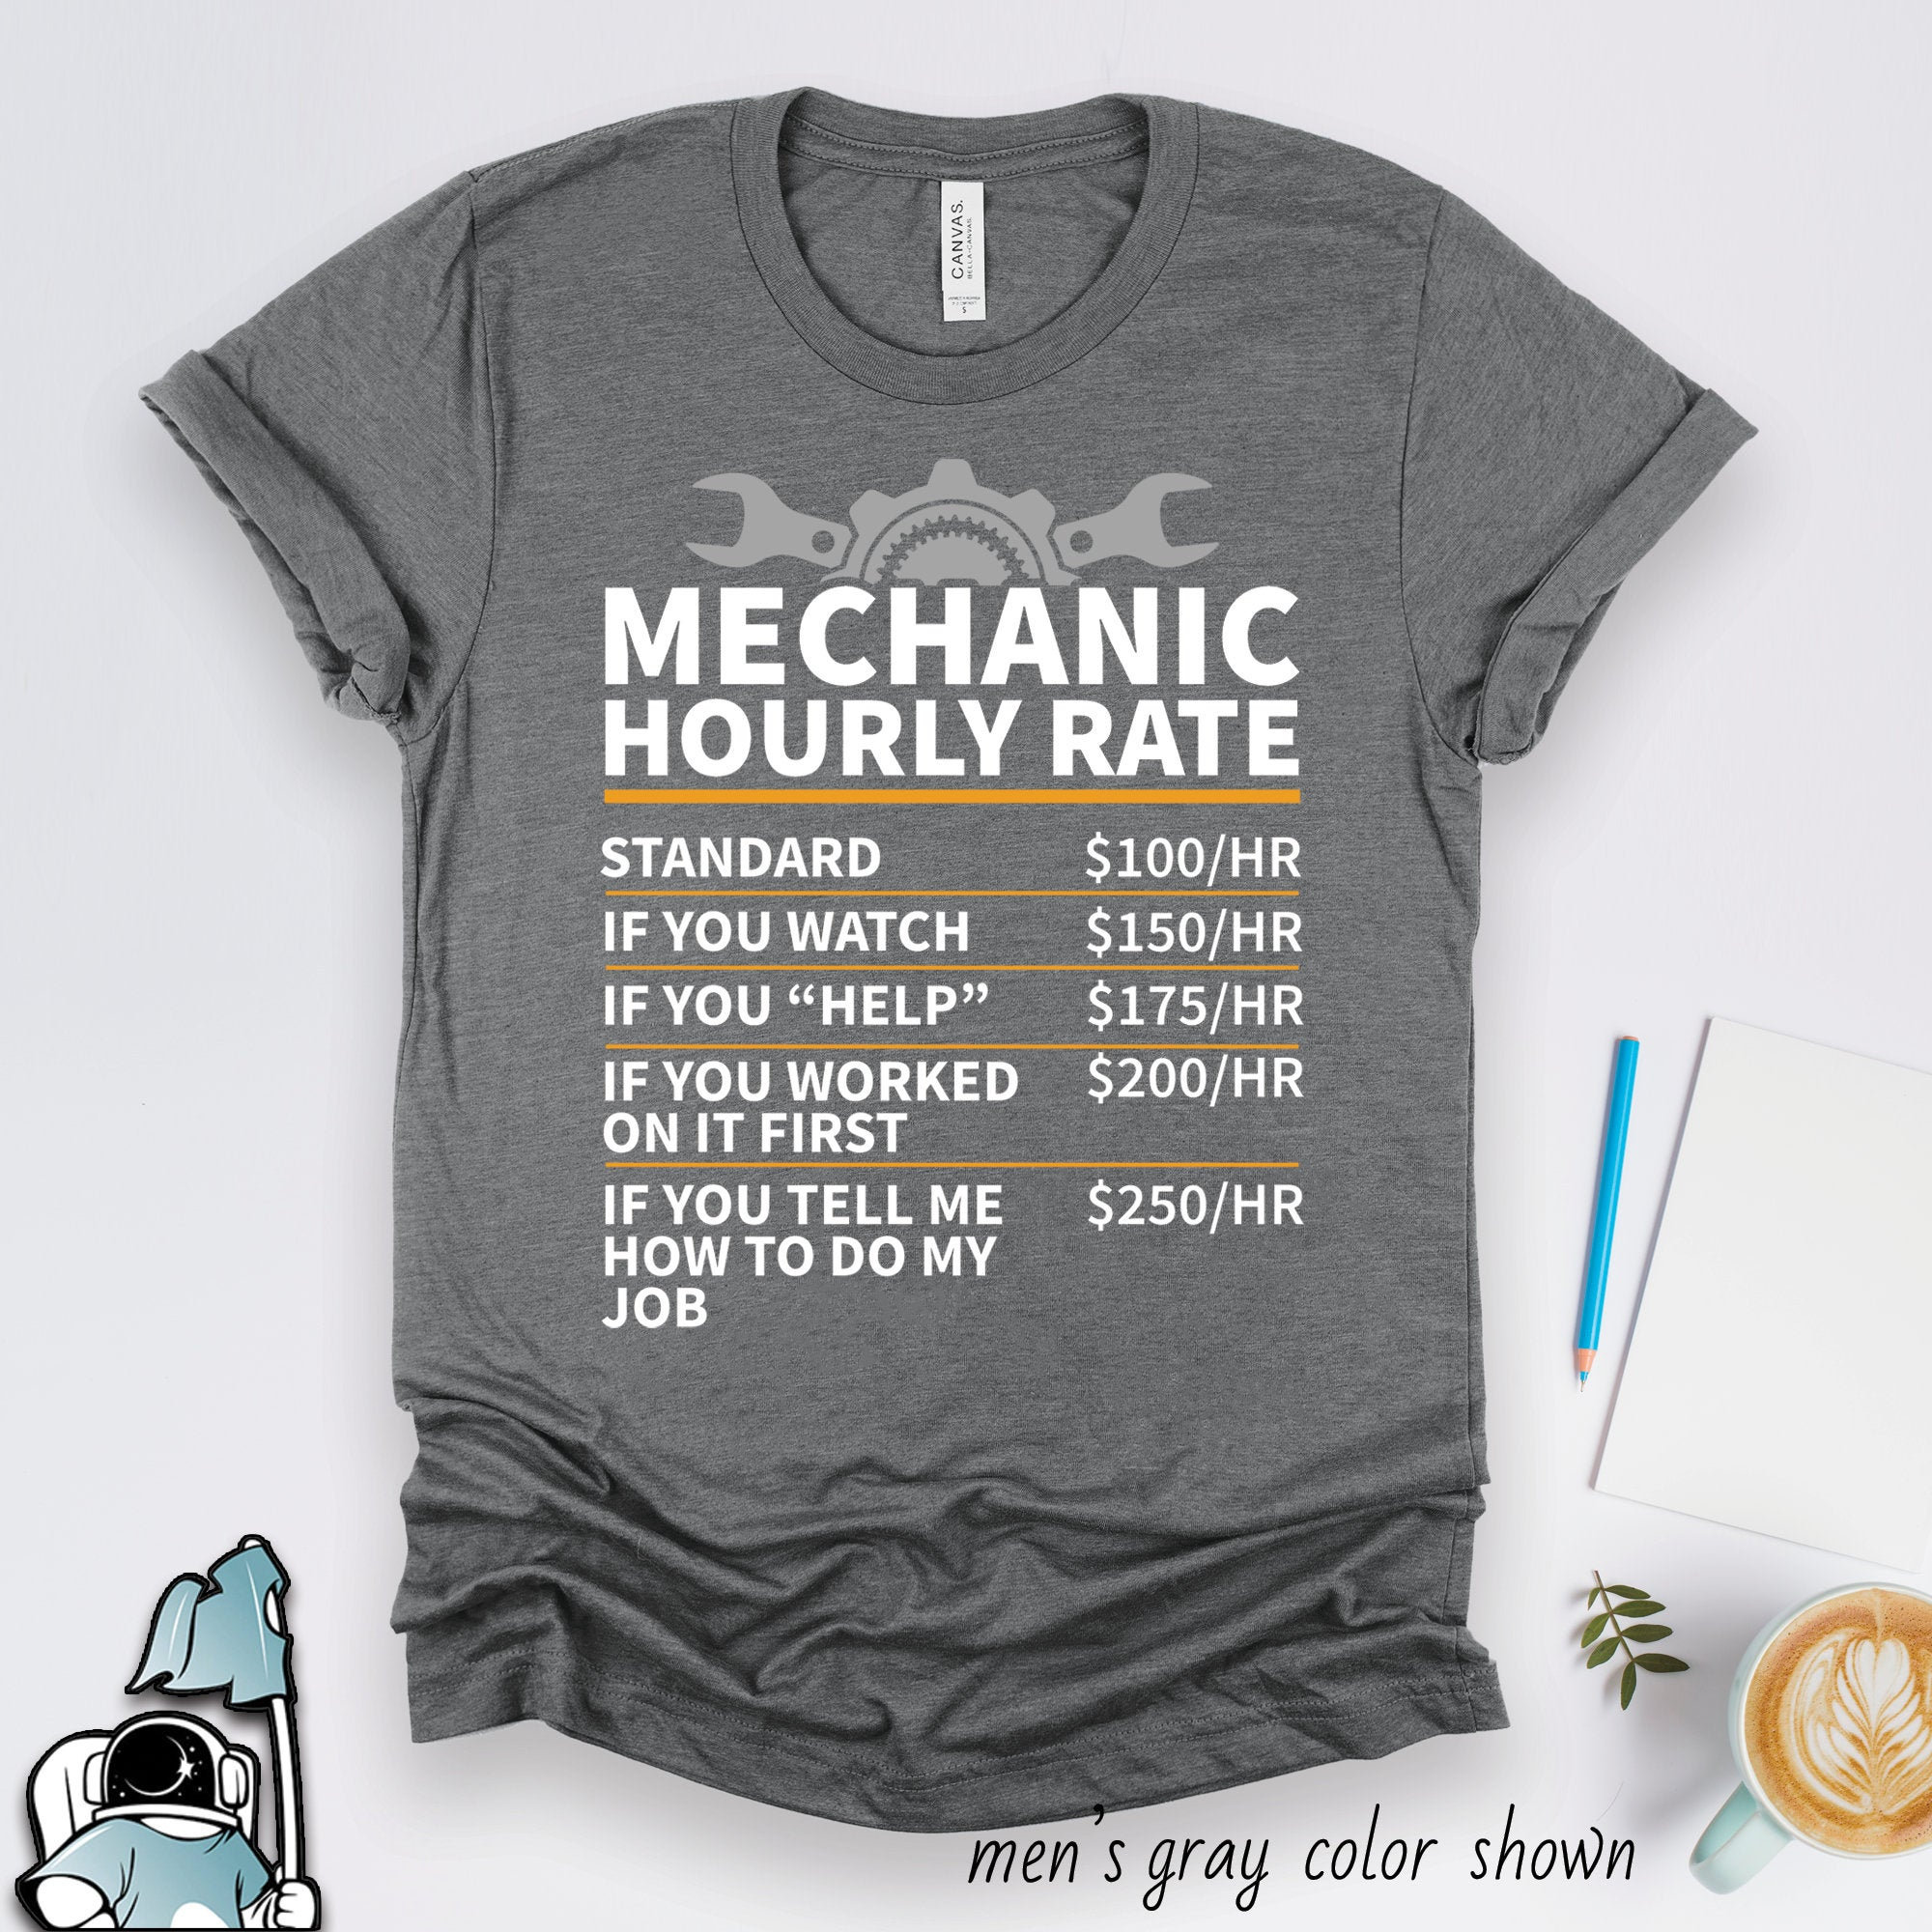 I Can Fix Everything Funny Mechanic Gift Adult V Neck Short Sleeve T Shirts 